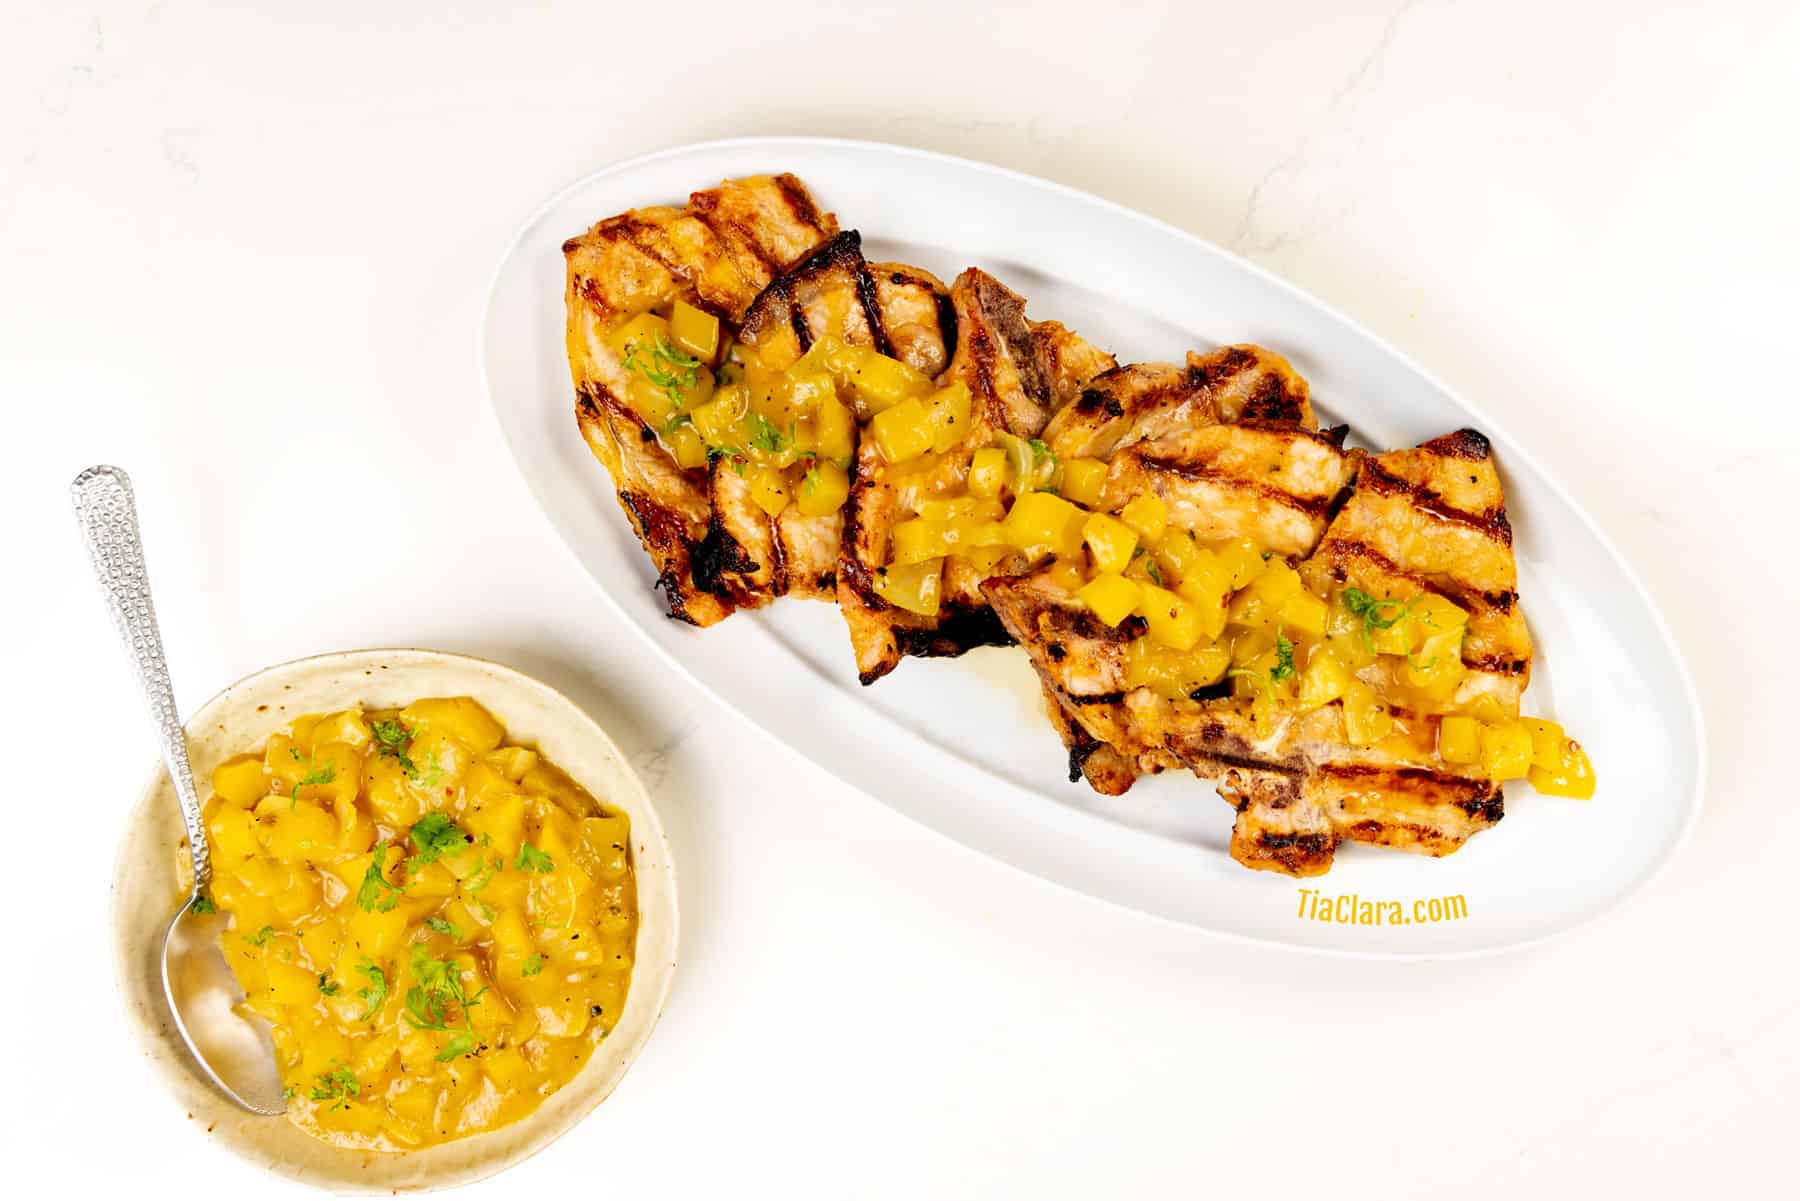 Sweet and spicy pork chops with mango salsa.